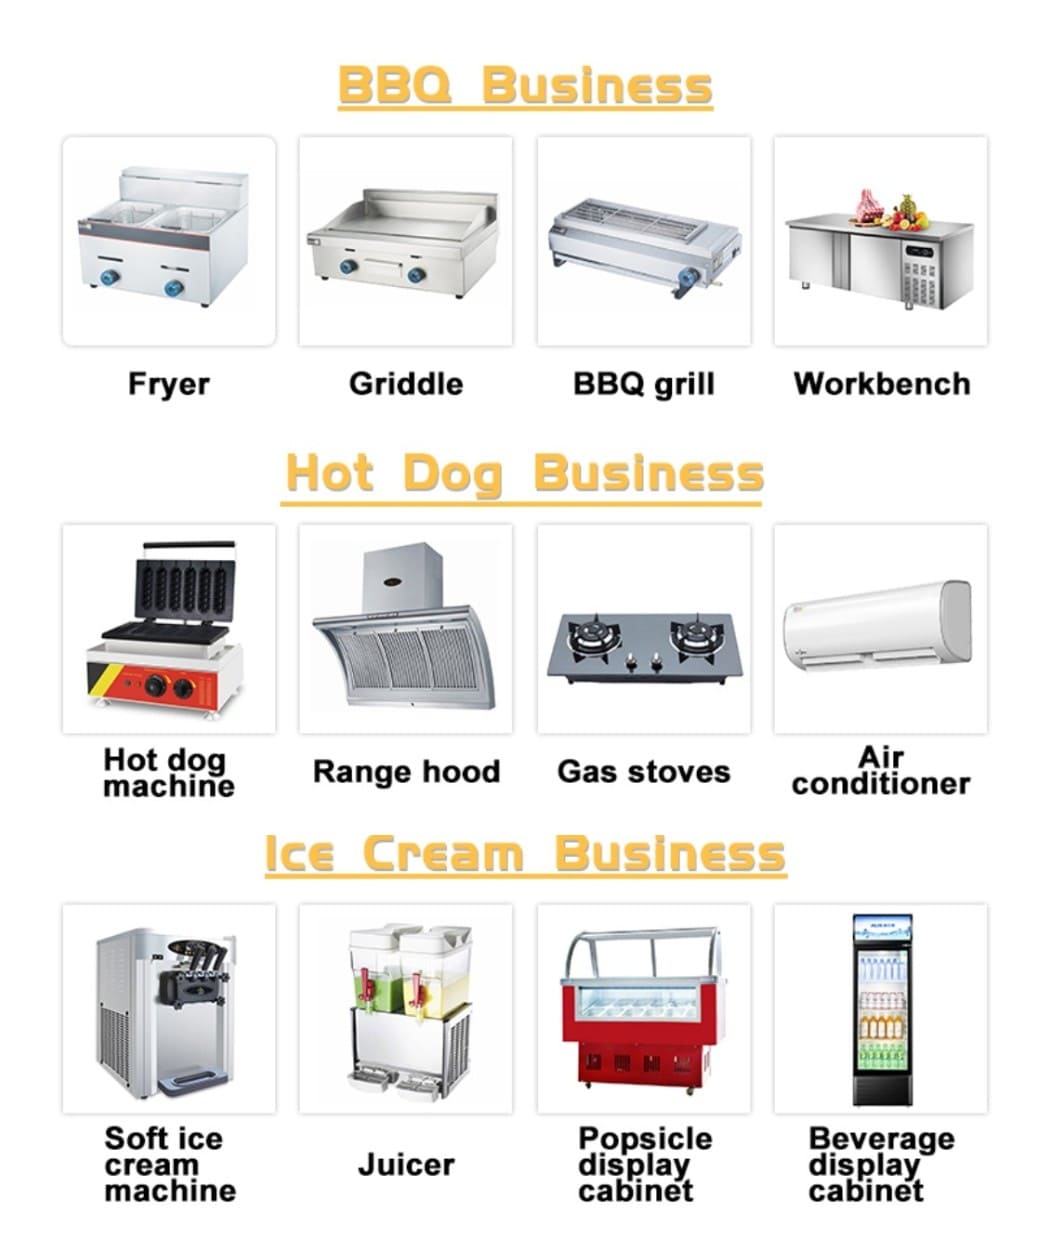 Commercial Kitchen Technology: Restaurant Equipment You Need